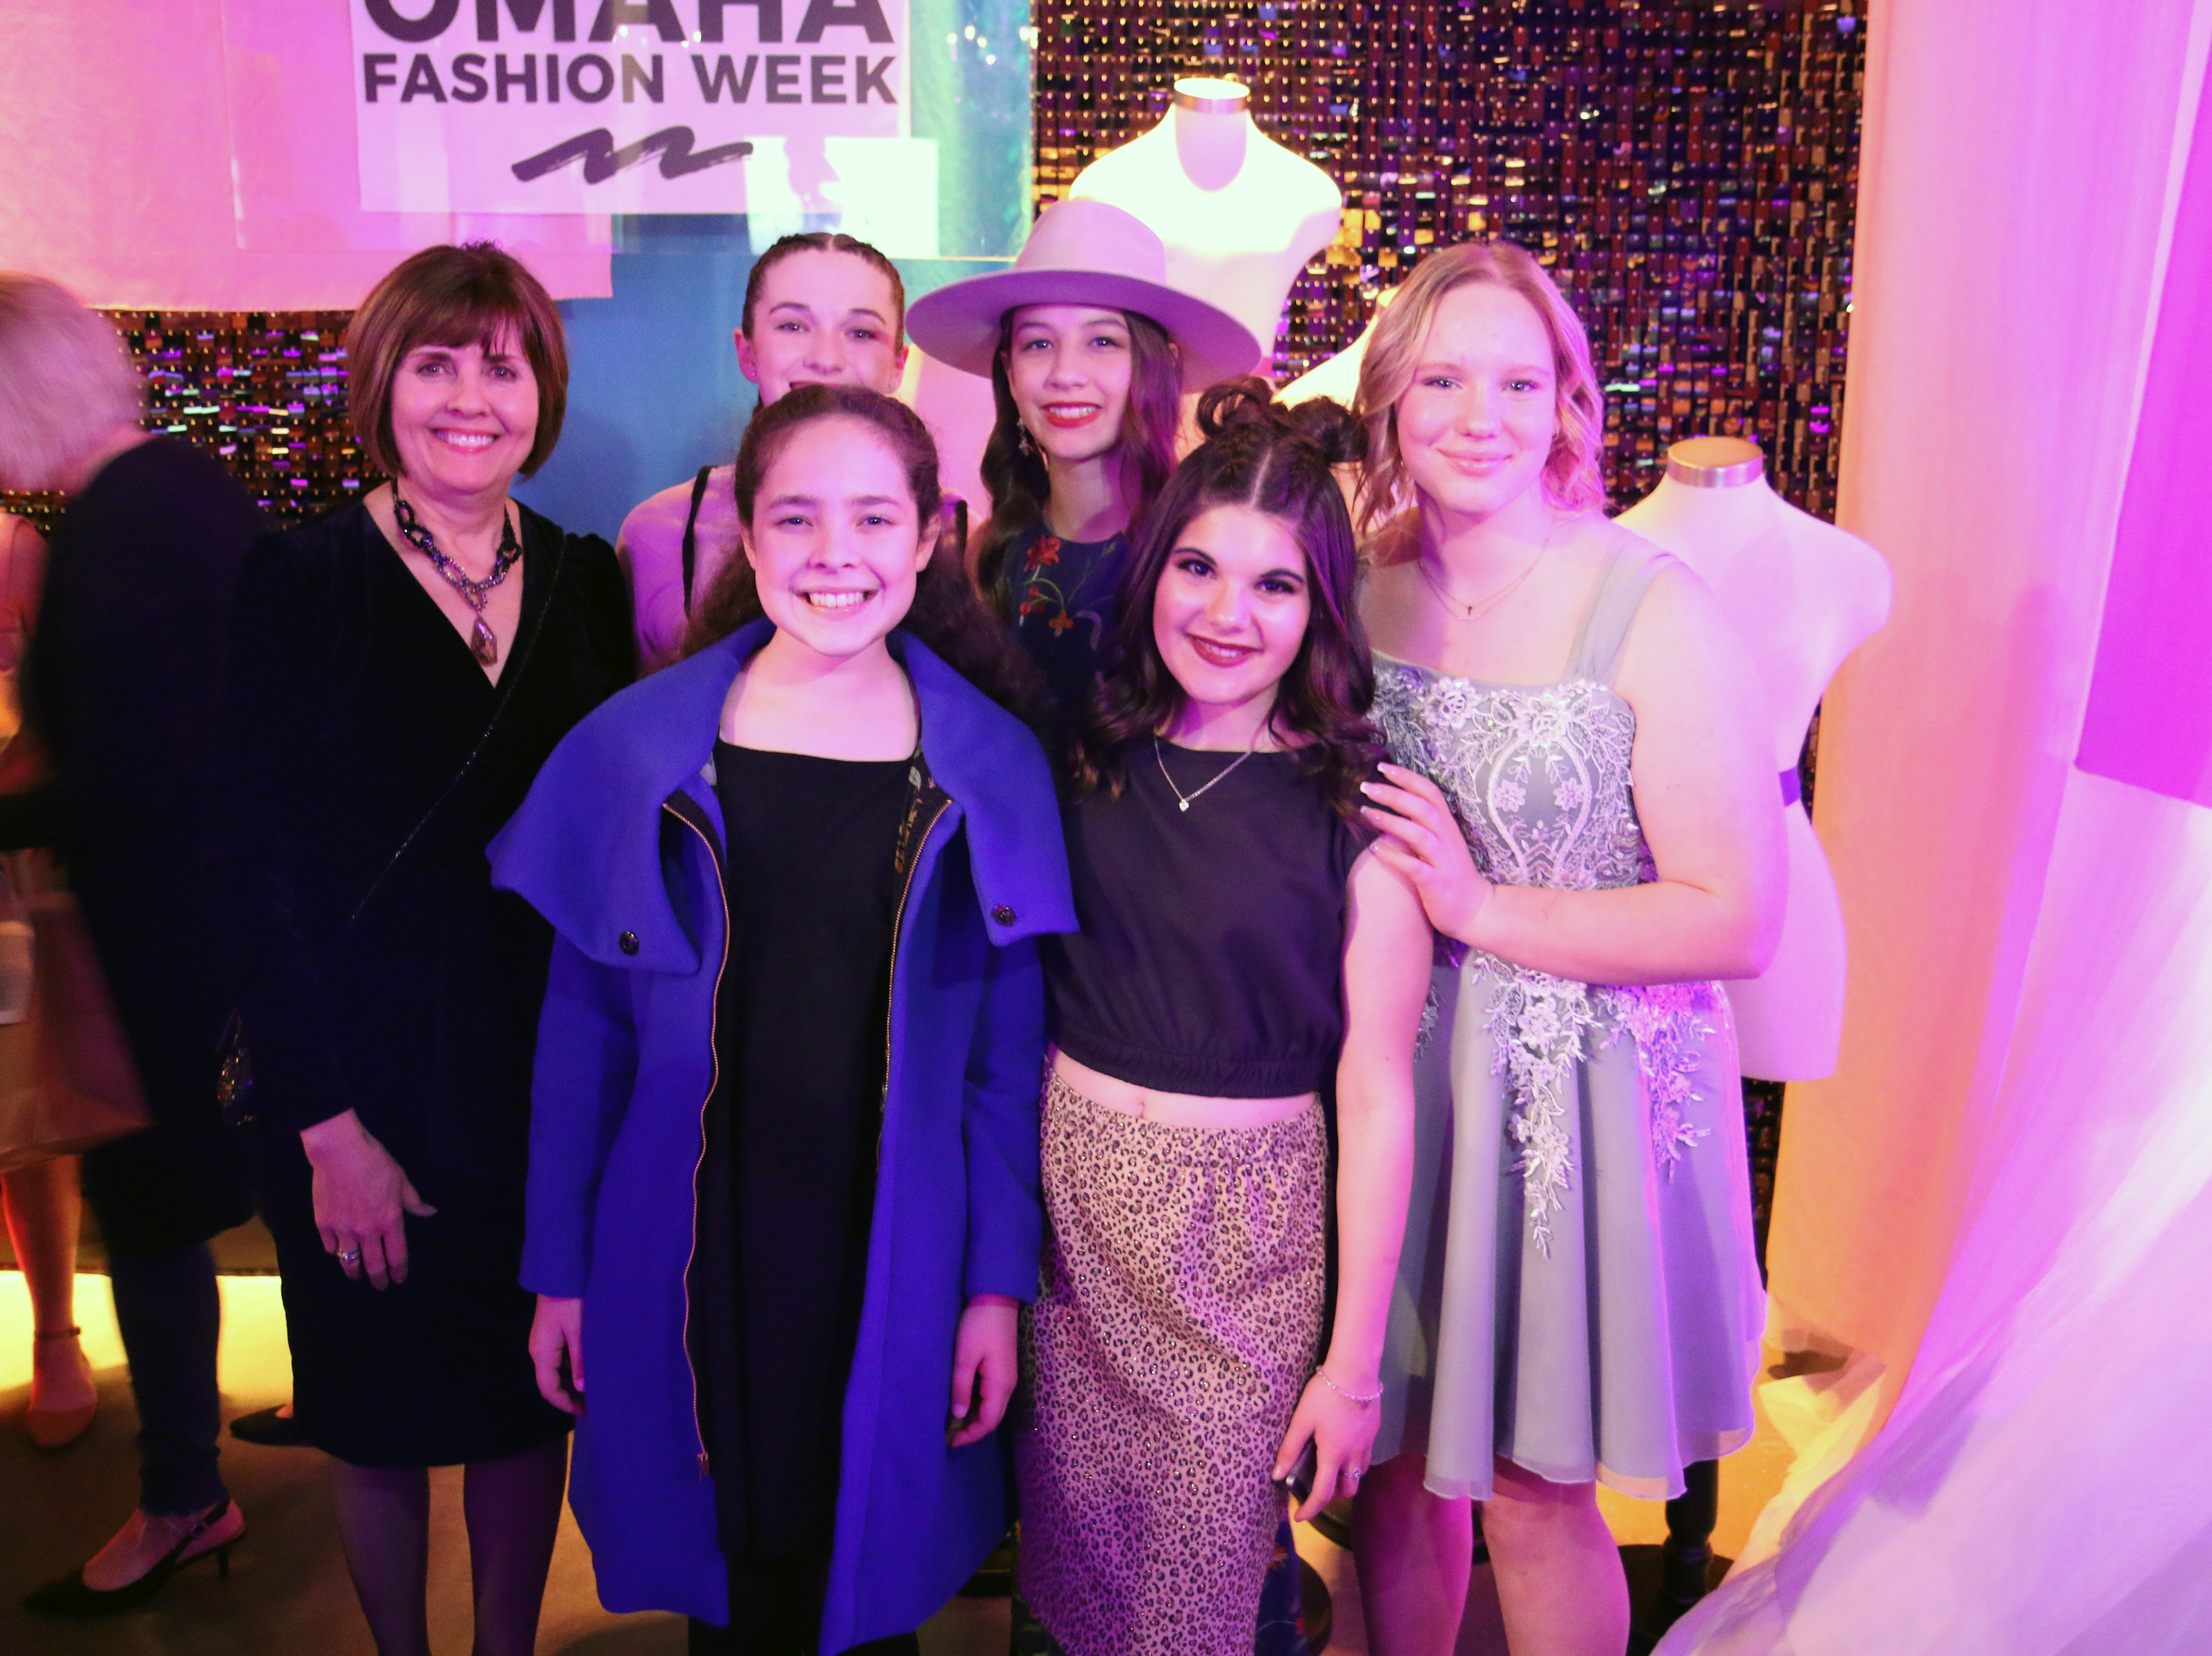 8 Lancaster County 4-H’ers Modeled Their Sewn Garments at Omaha Fashion Week